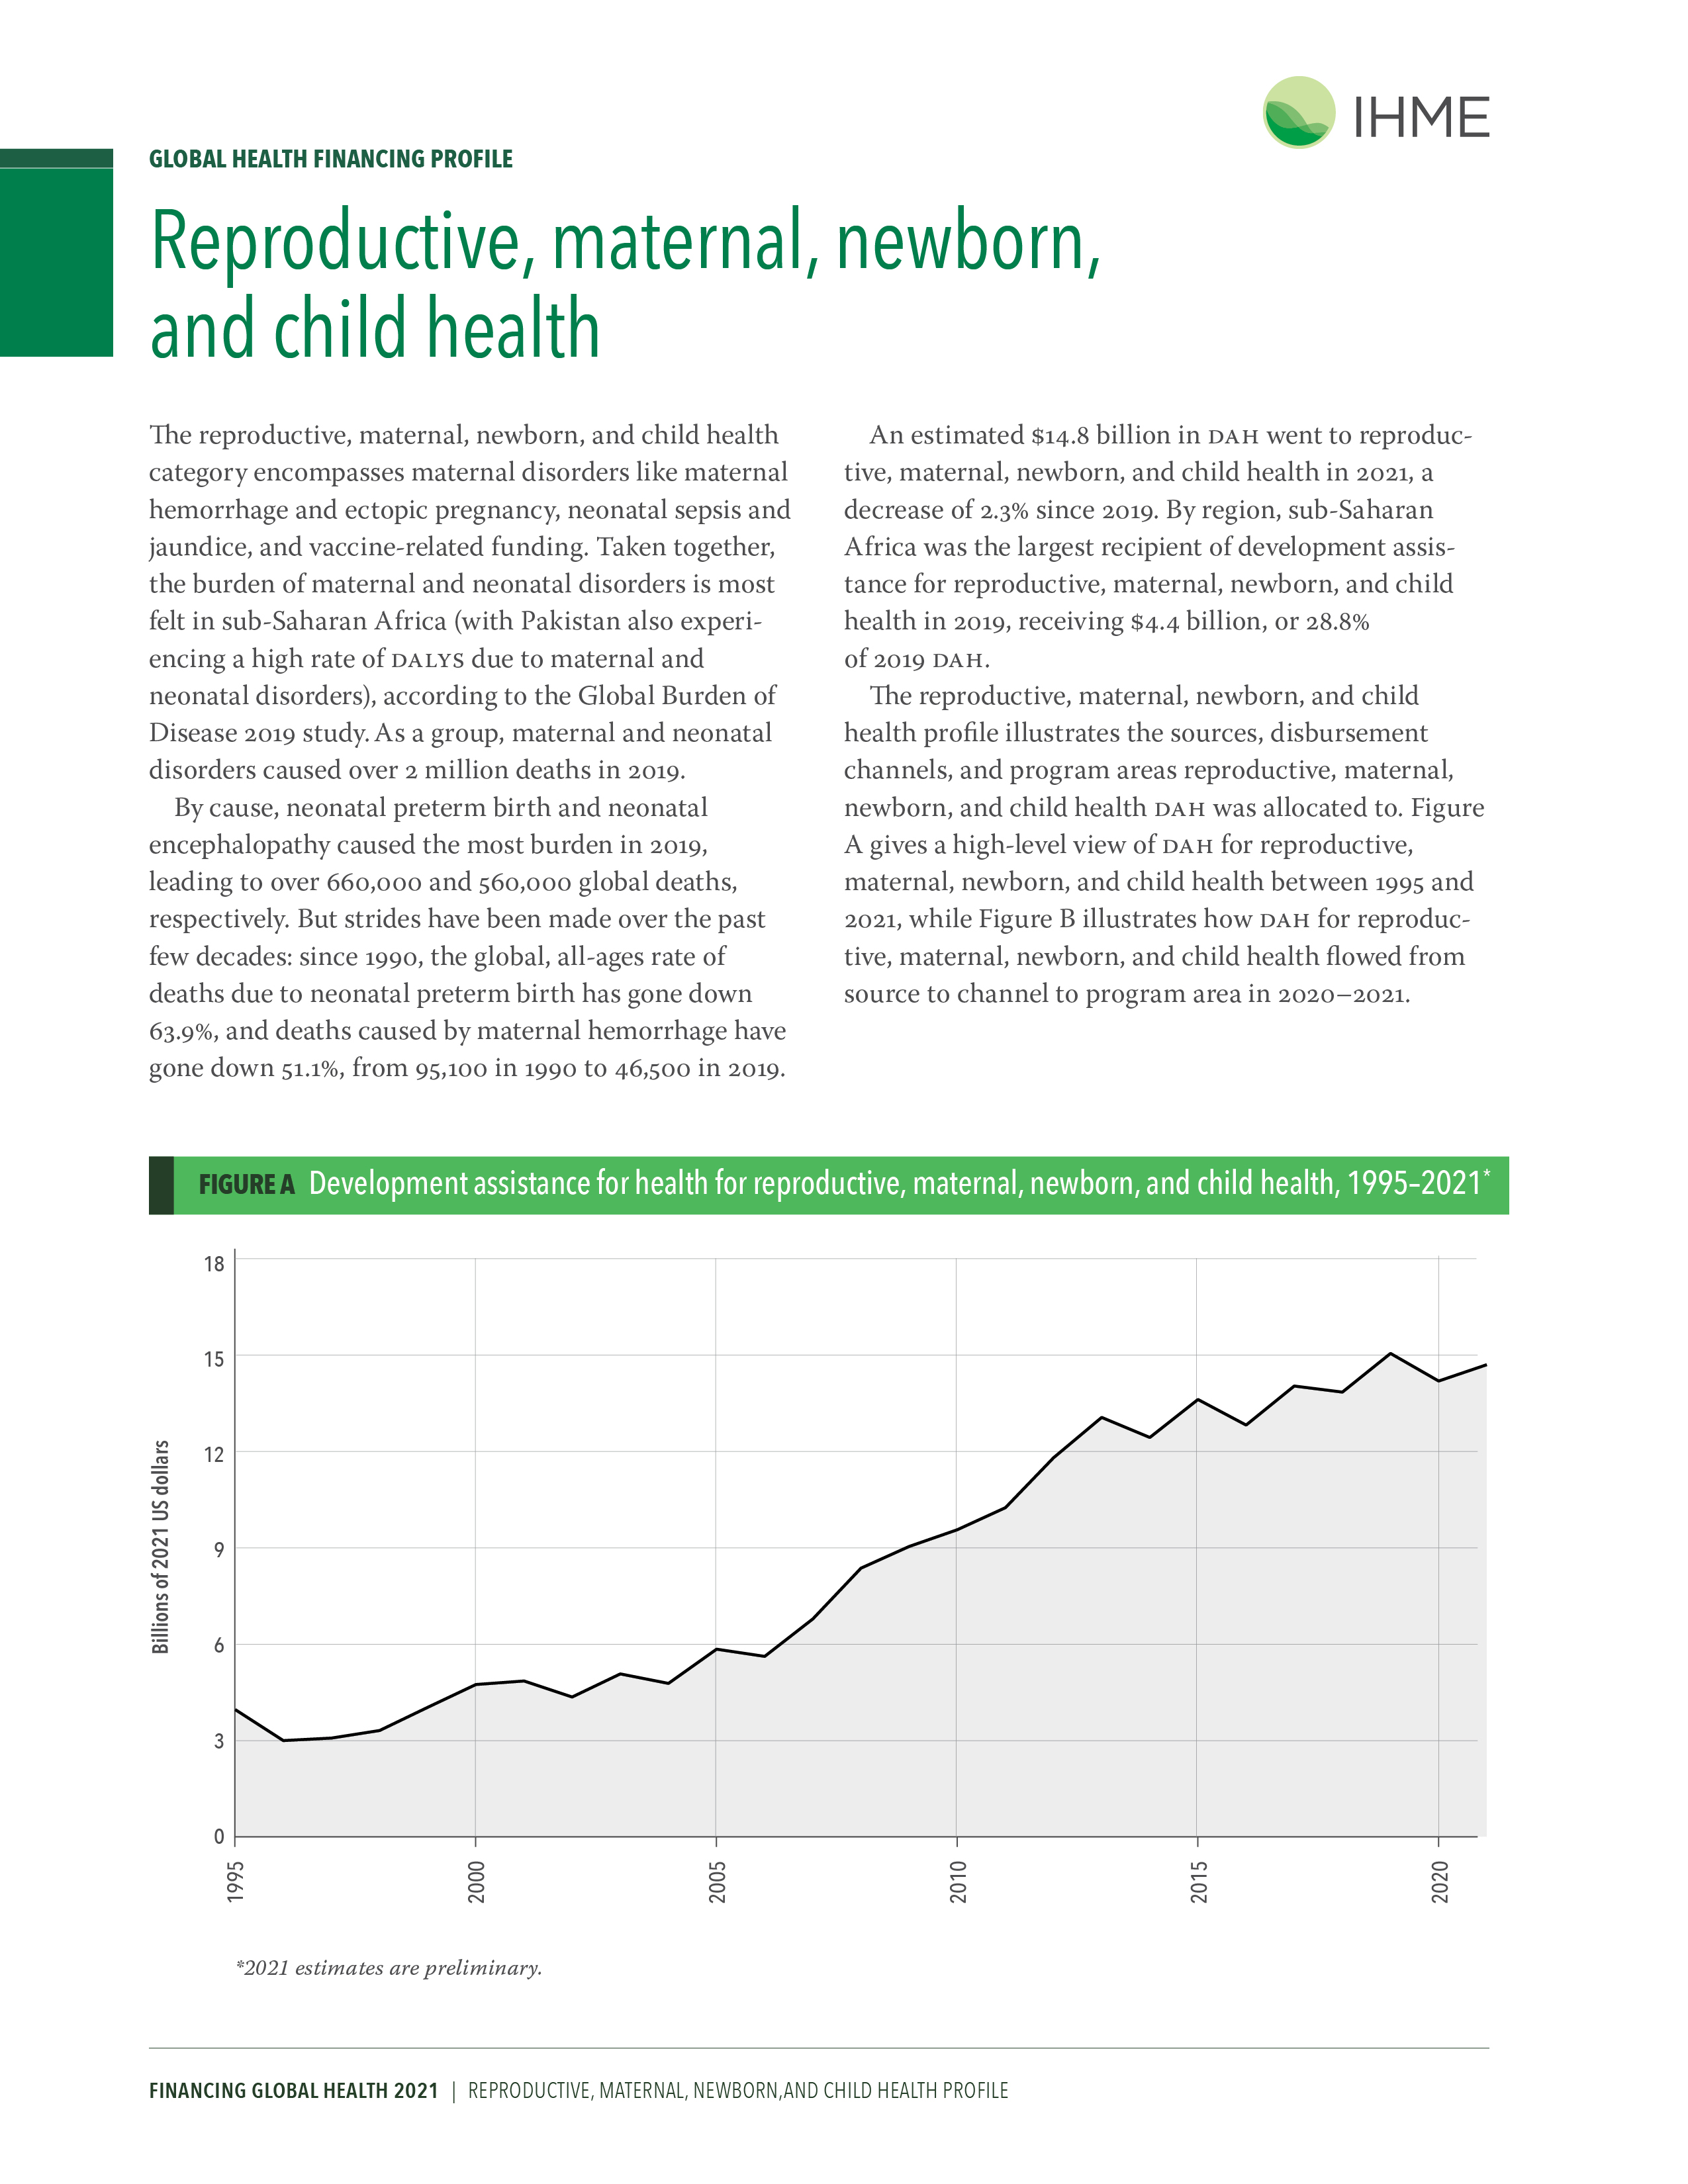 Disease spending profile for reproductive, maternal, newborn, and child health: page 1 provides an overview of the expenses globally and development assistance for health. Download the profile for more details. 